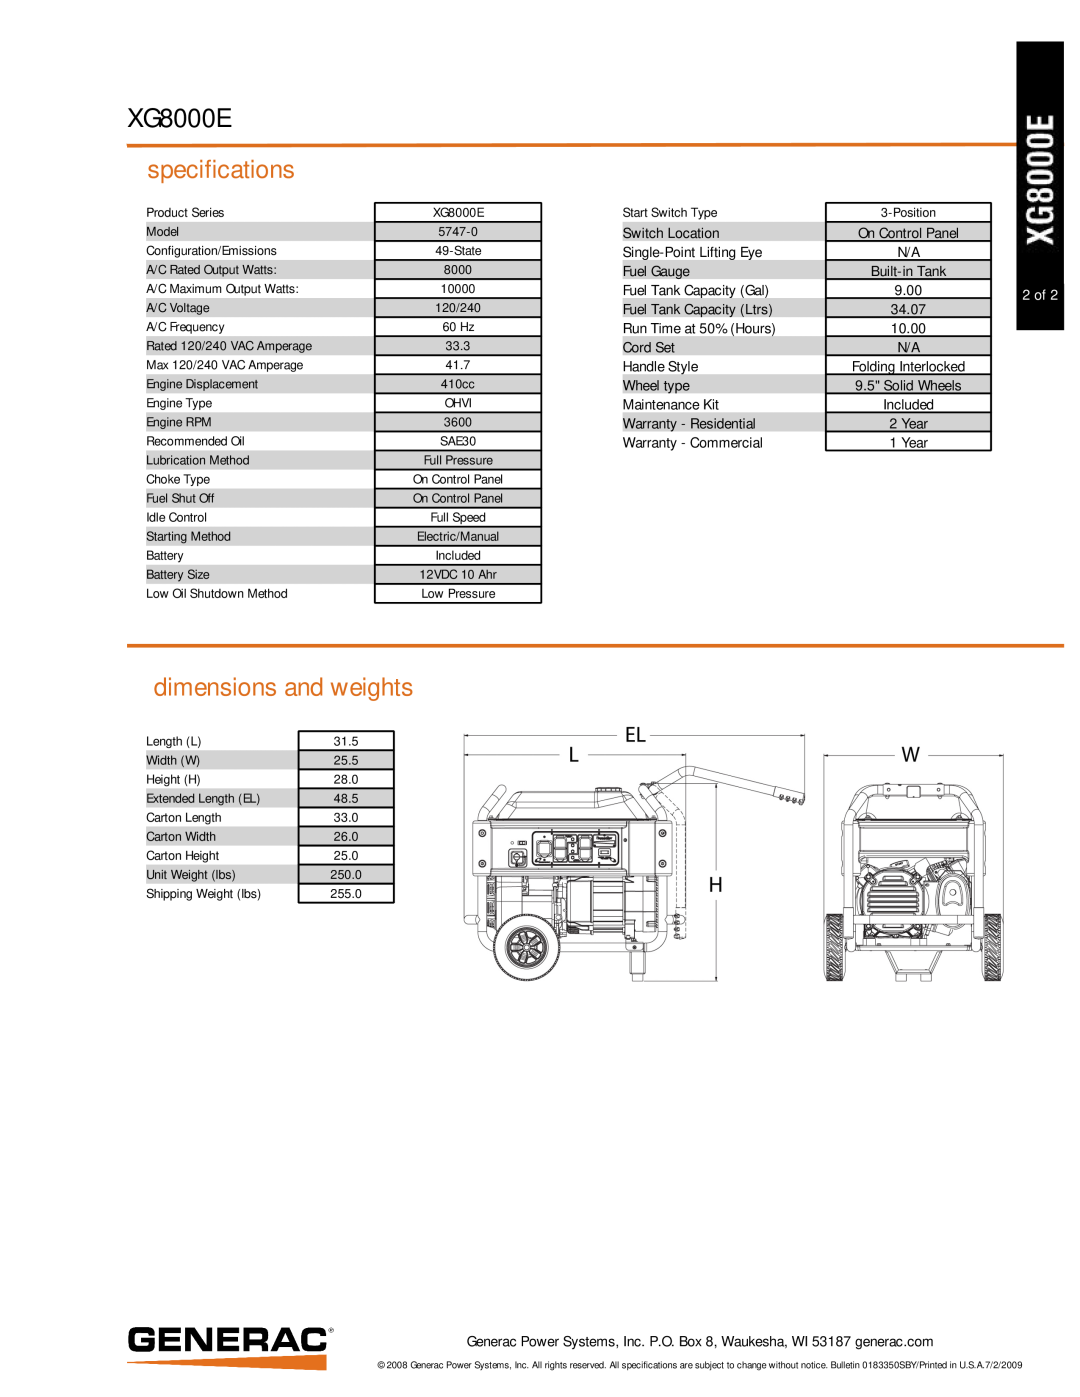 Generac Power Systems 5747-0 manual XG8000E, specifications, dimensions and weights, 2 of 